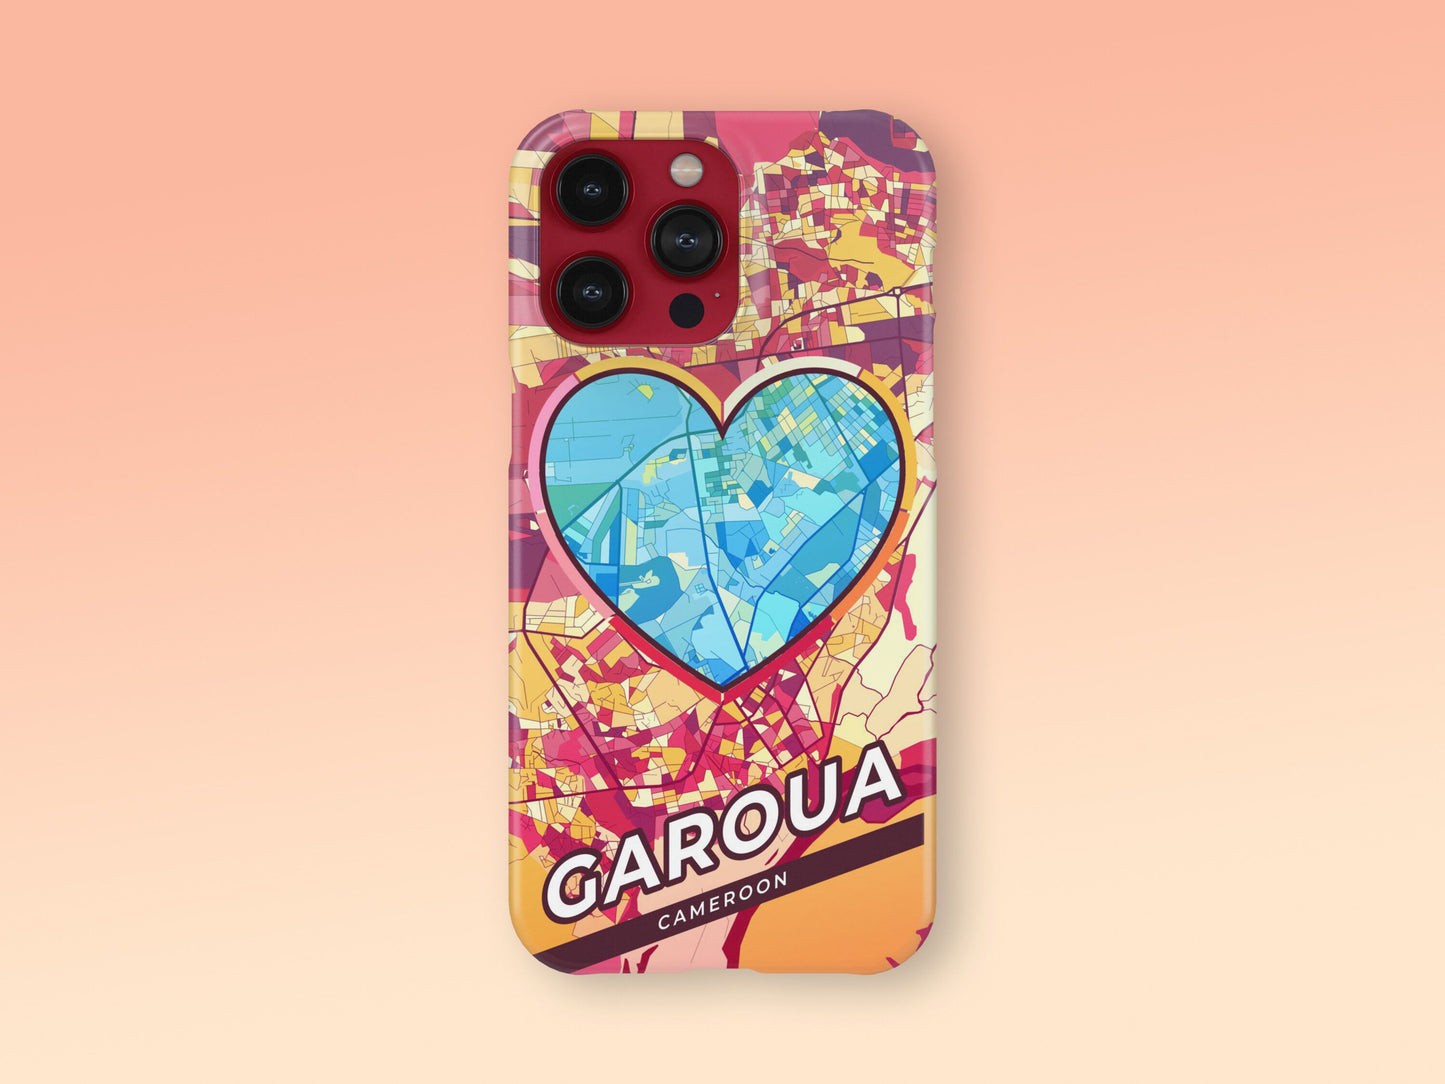 Garoua Cameroon slim phone case with colorful icon. Birthday, wedding or housewarming gift. Couple match cases. 2